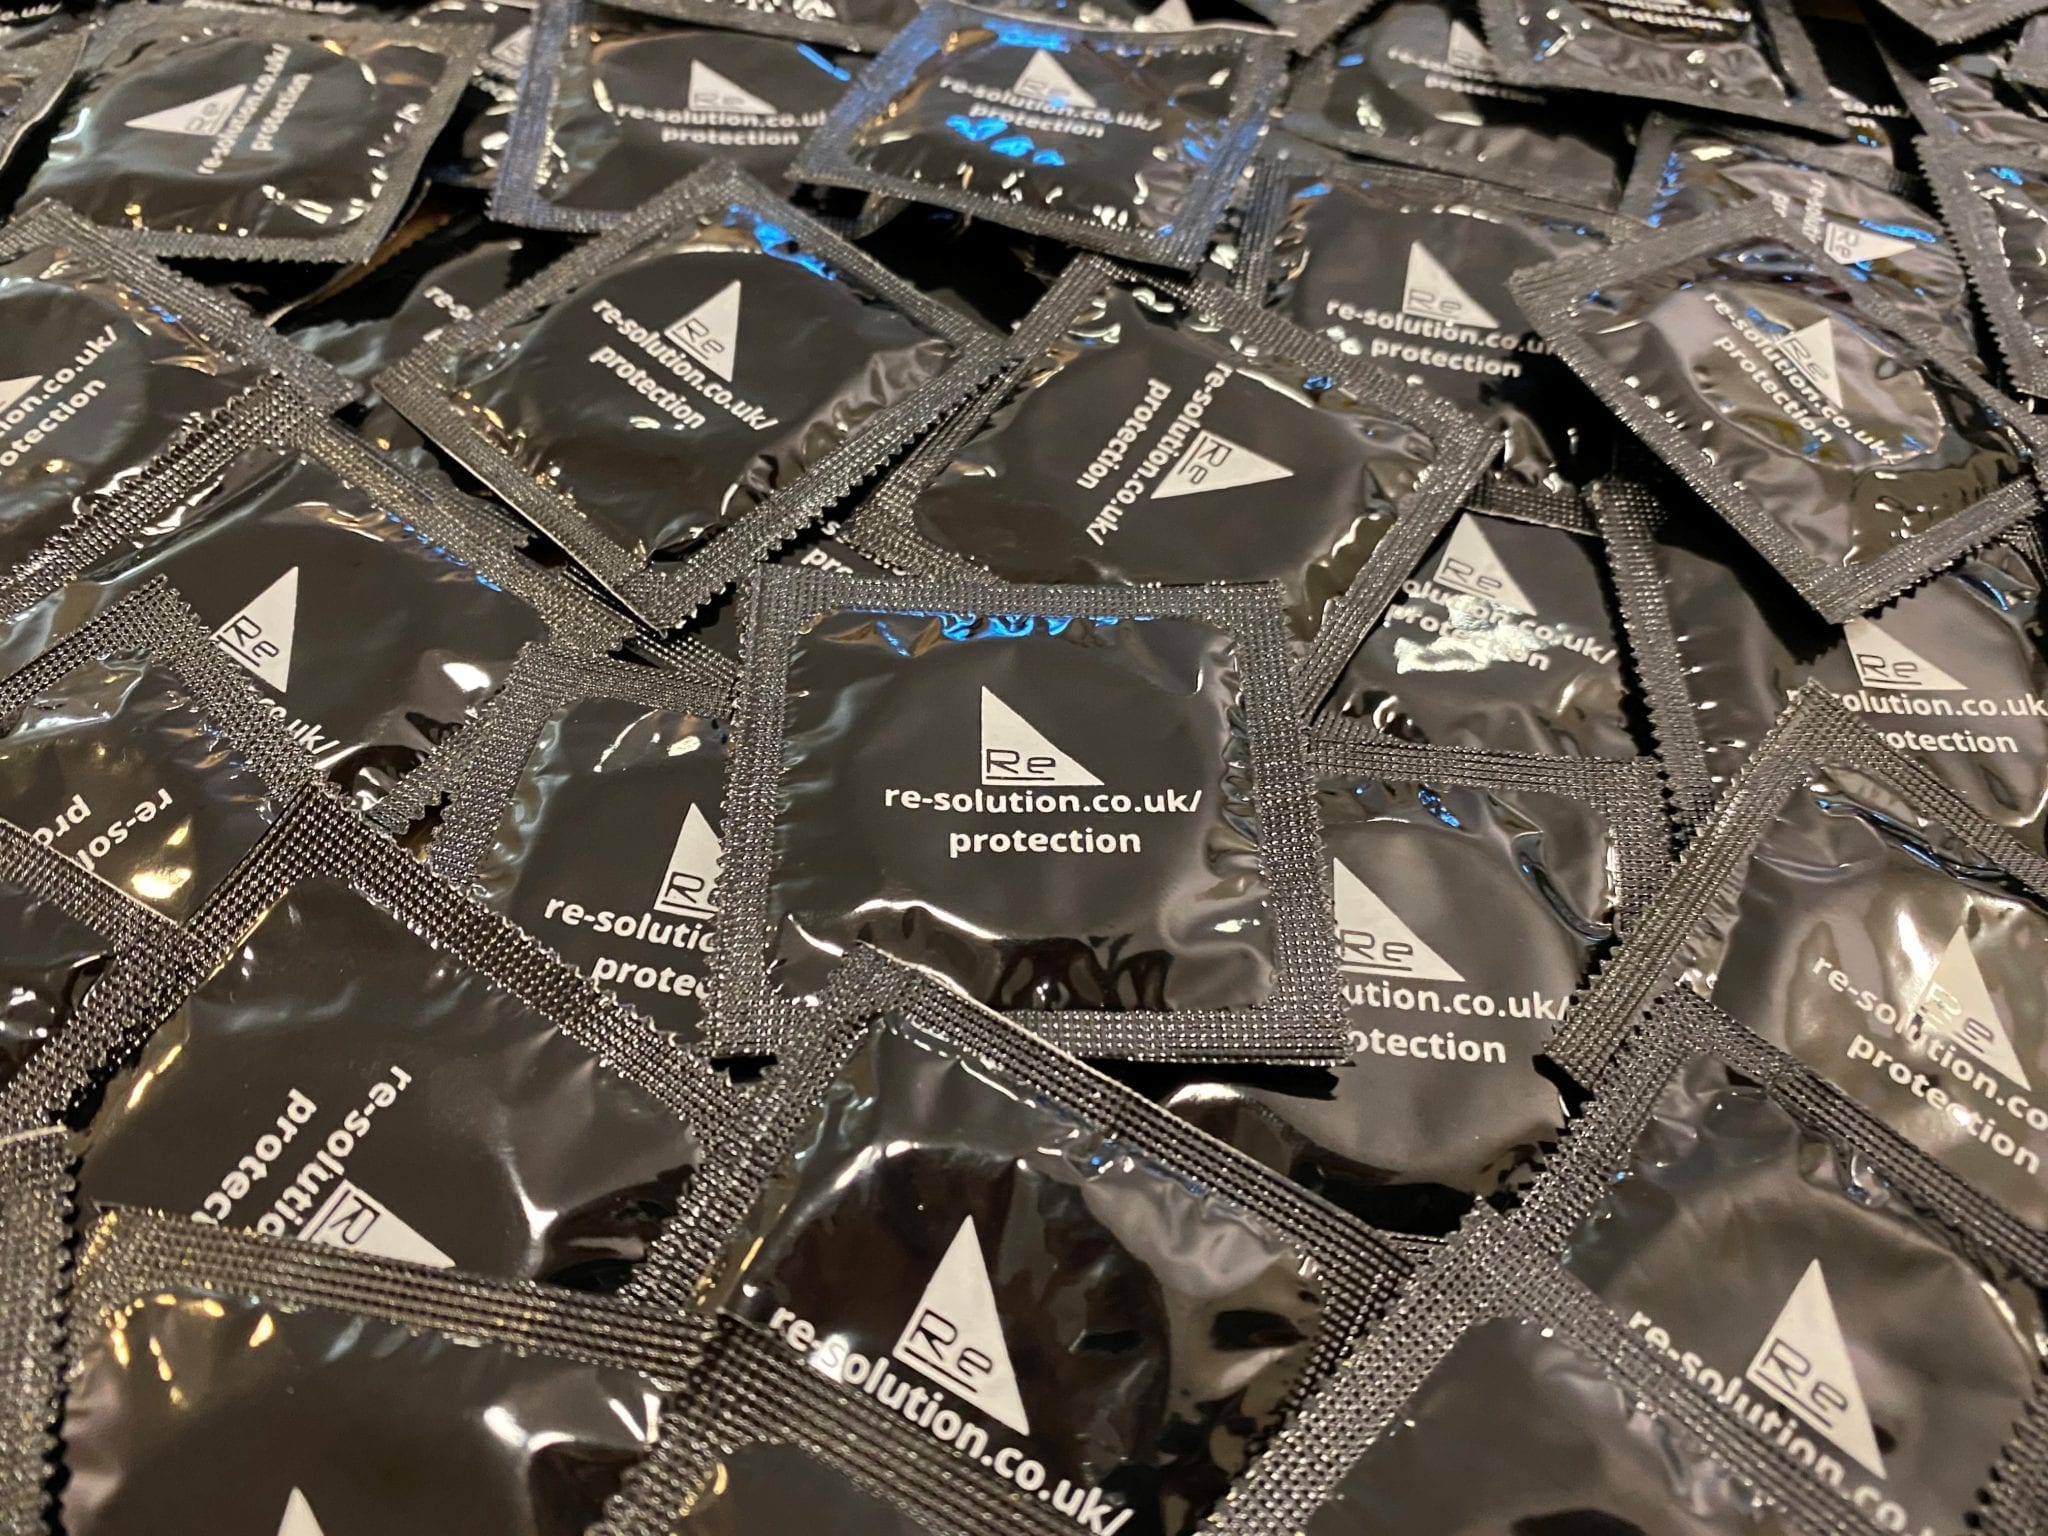 We sent Condoms out to the owners of London Organisations